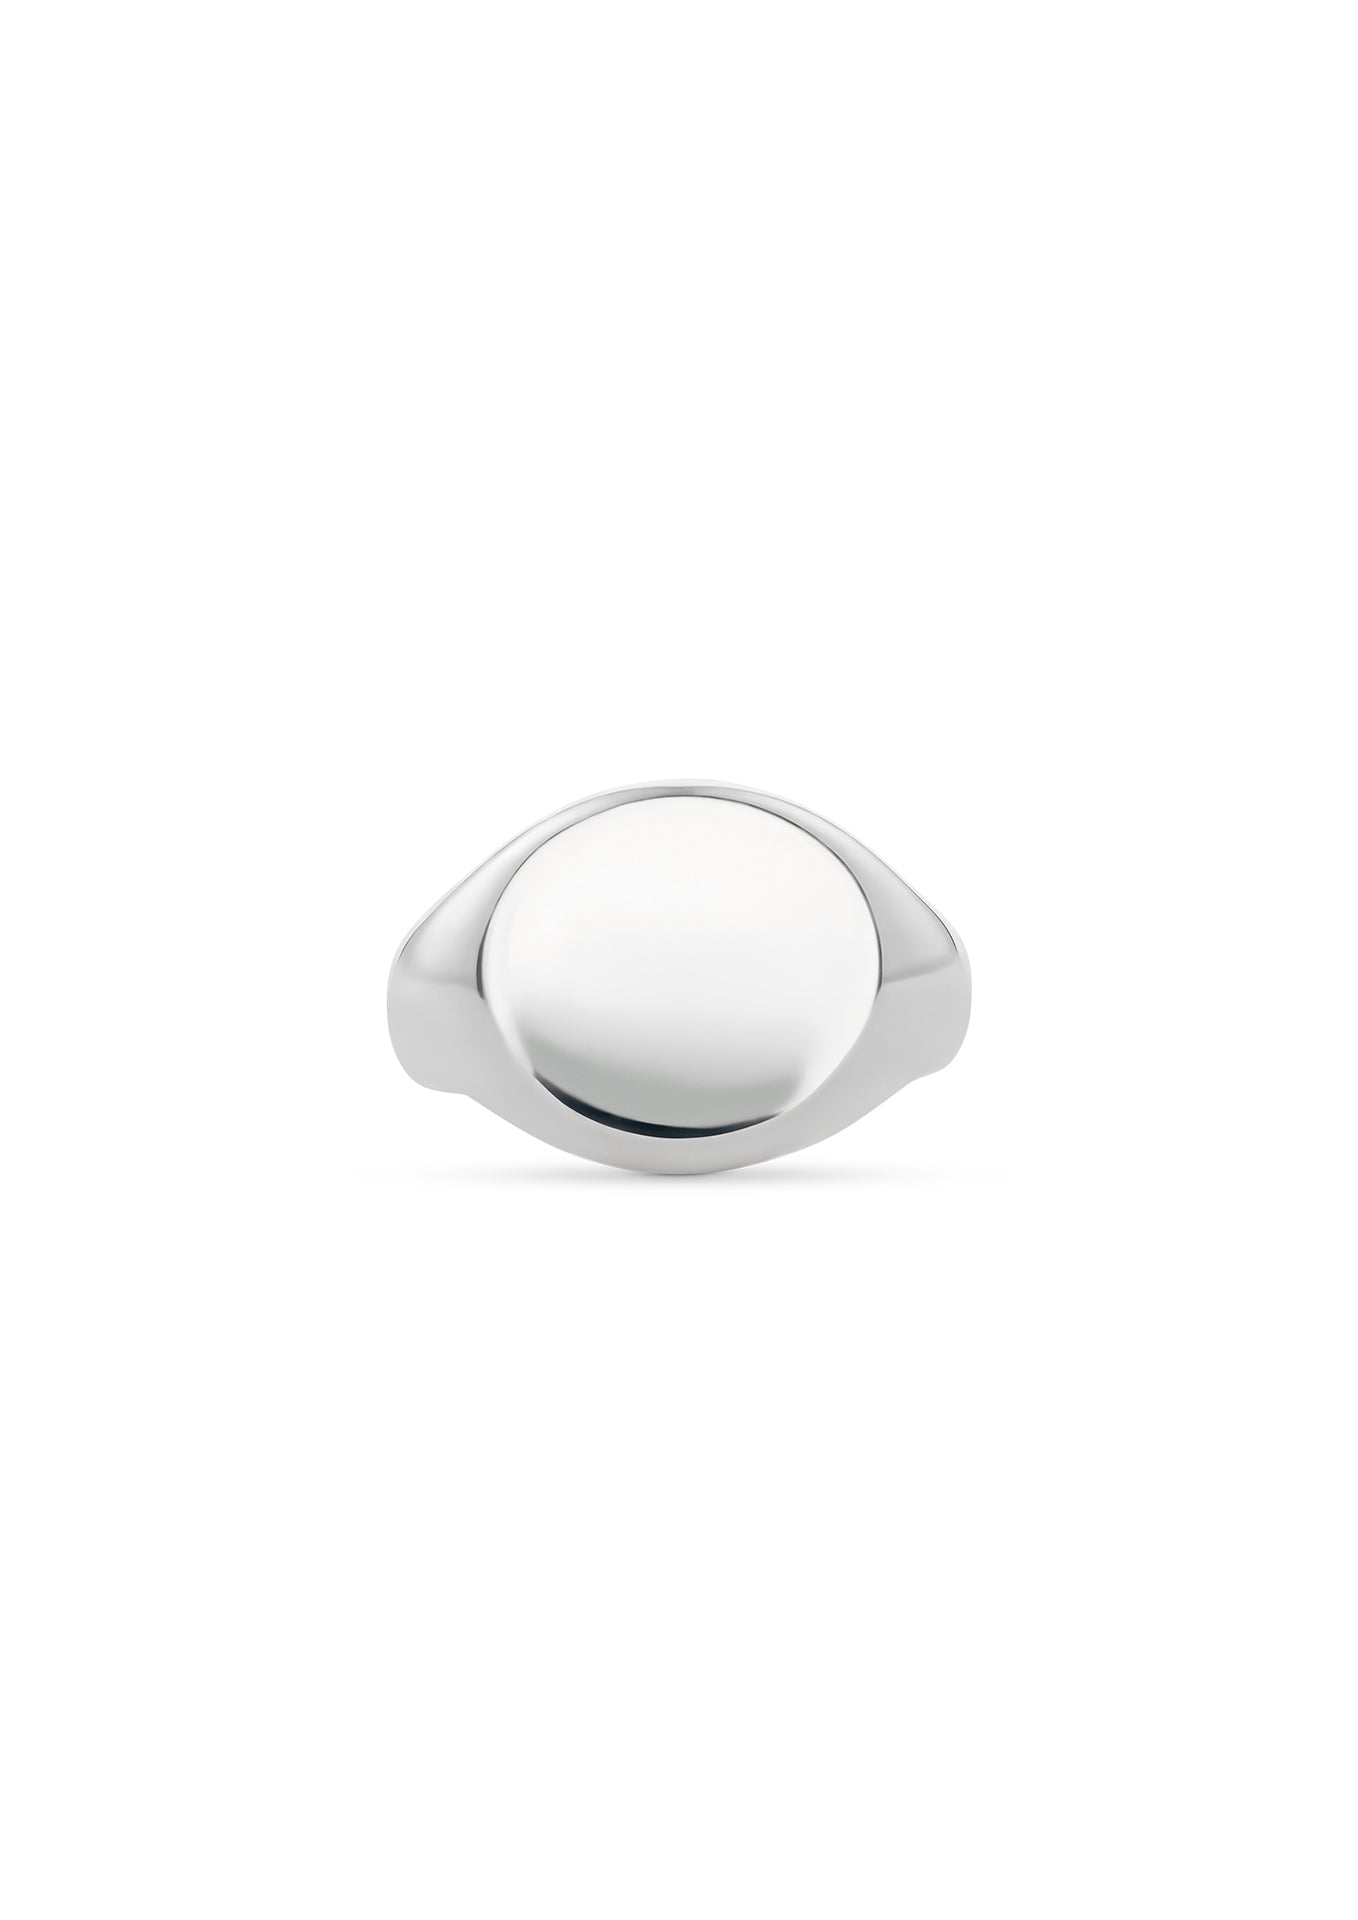 Statement Signet Ring Silver - NO MORE ACCESSORIES